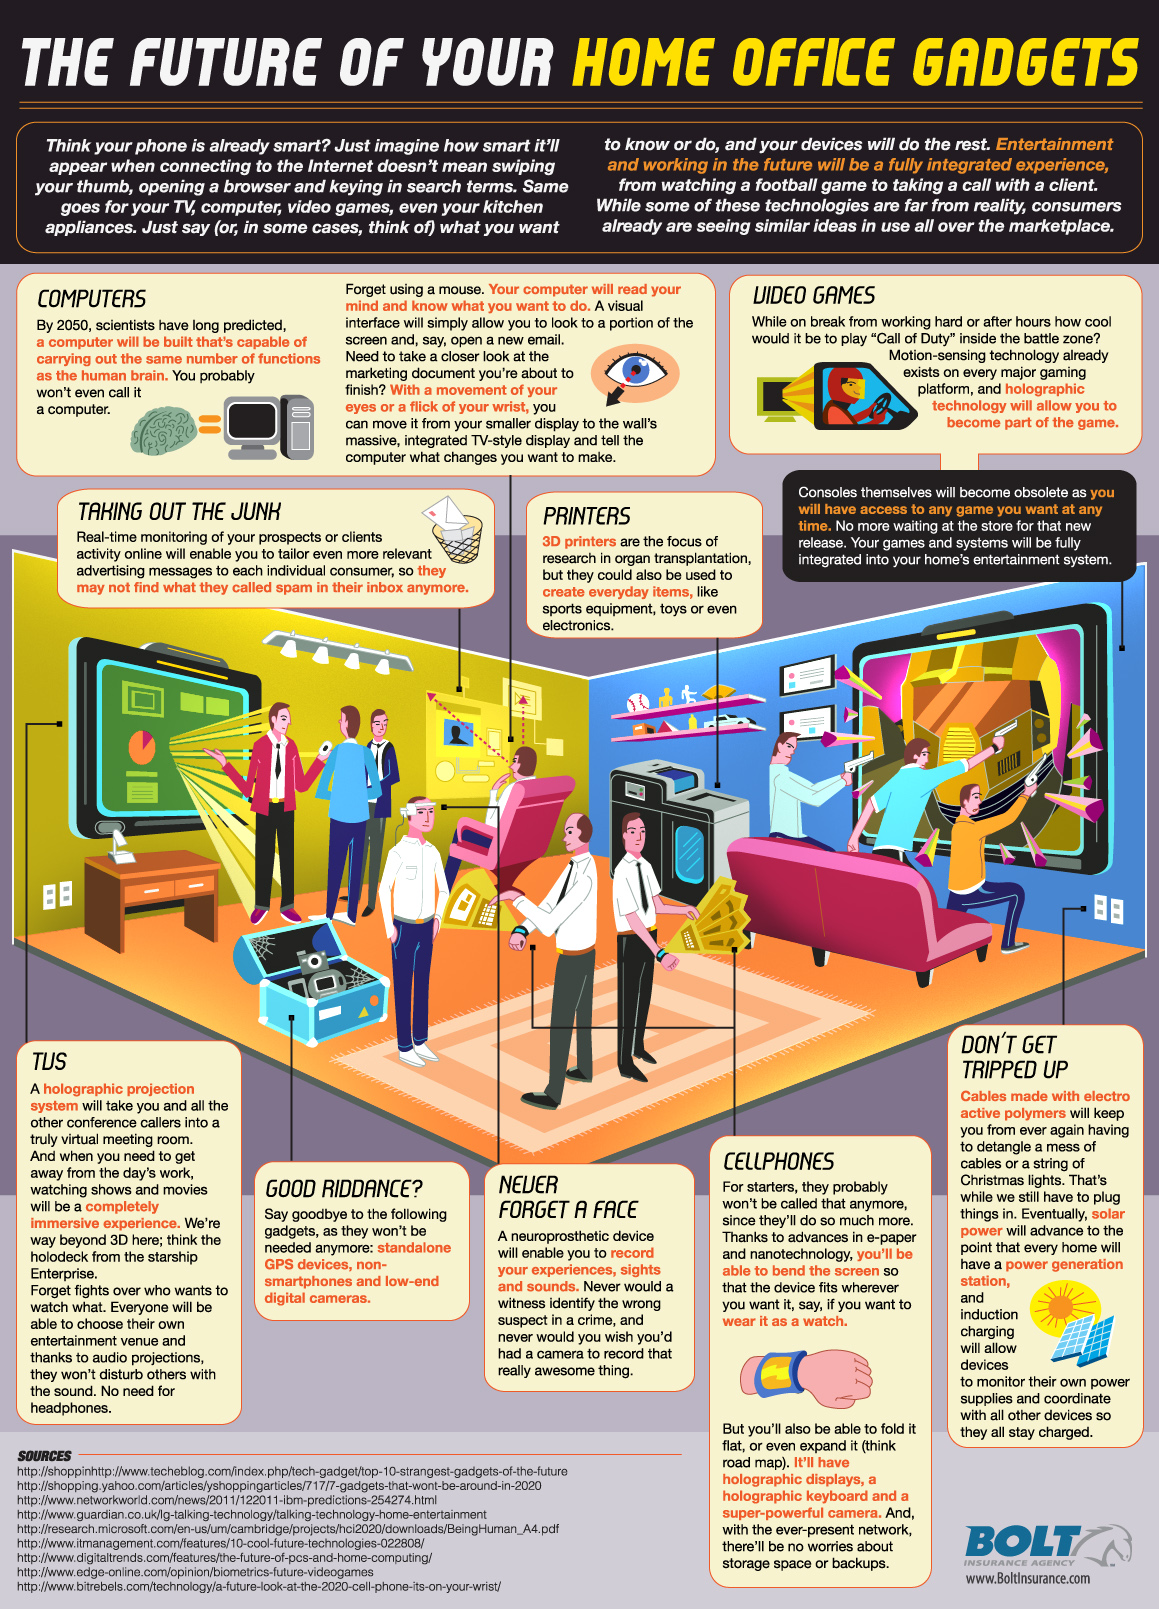 Future of Your Home Office Gadgets Infographic explores the future  technology of the home office